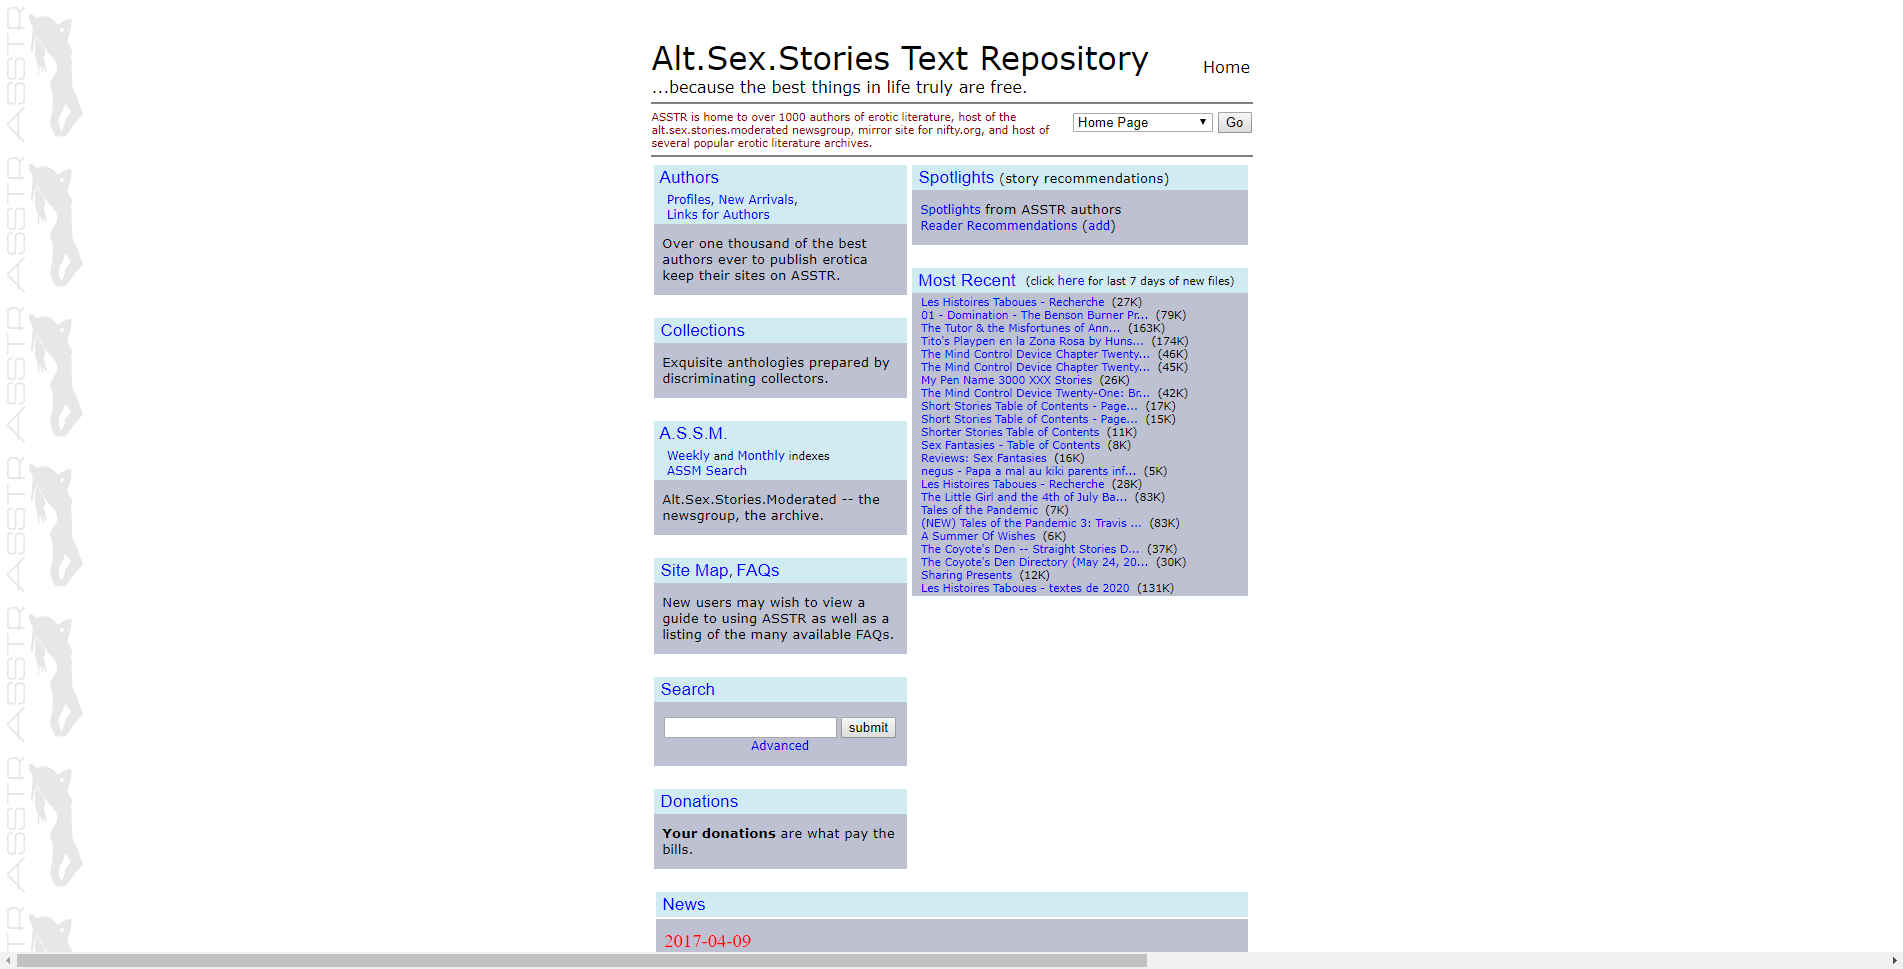 The Alt intercourse stories text Repository